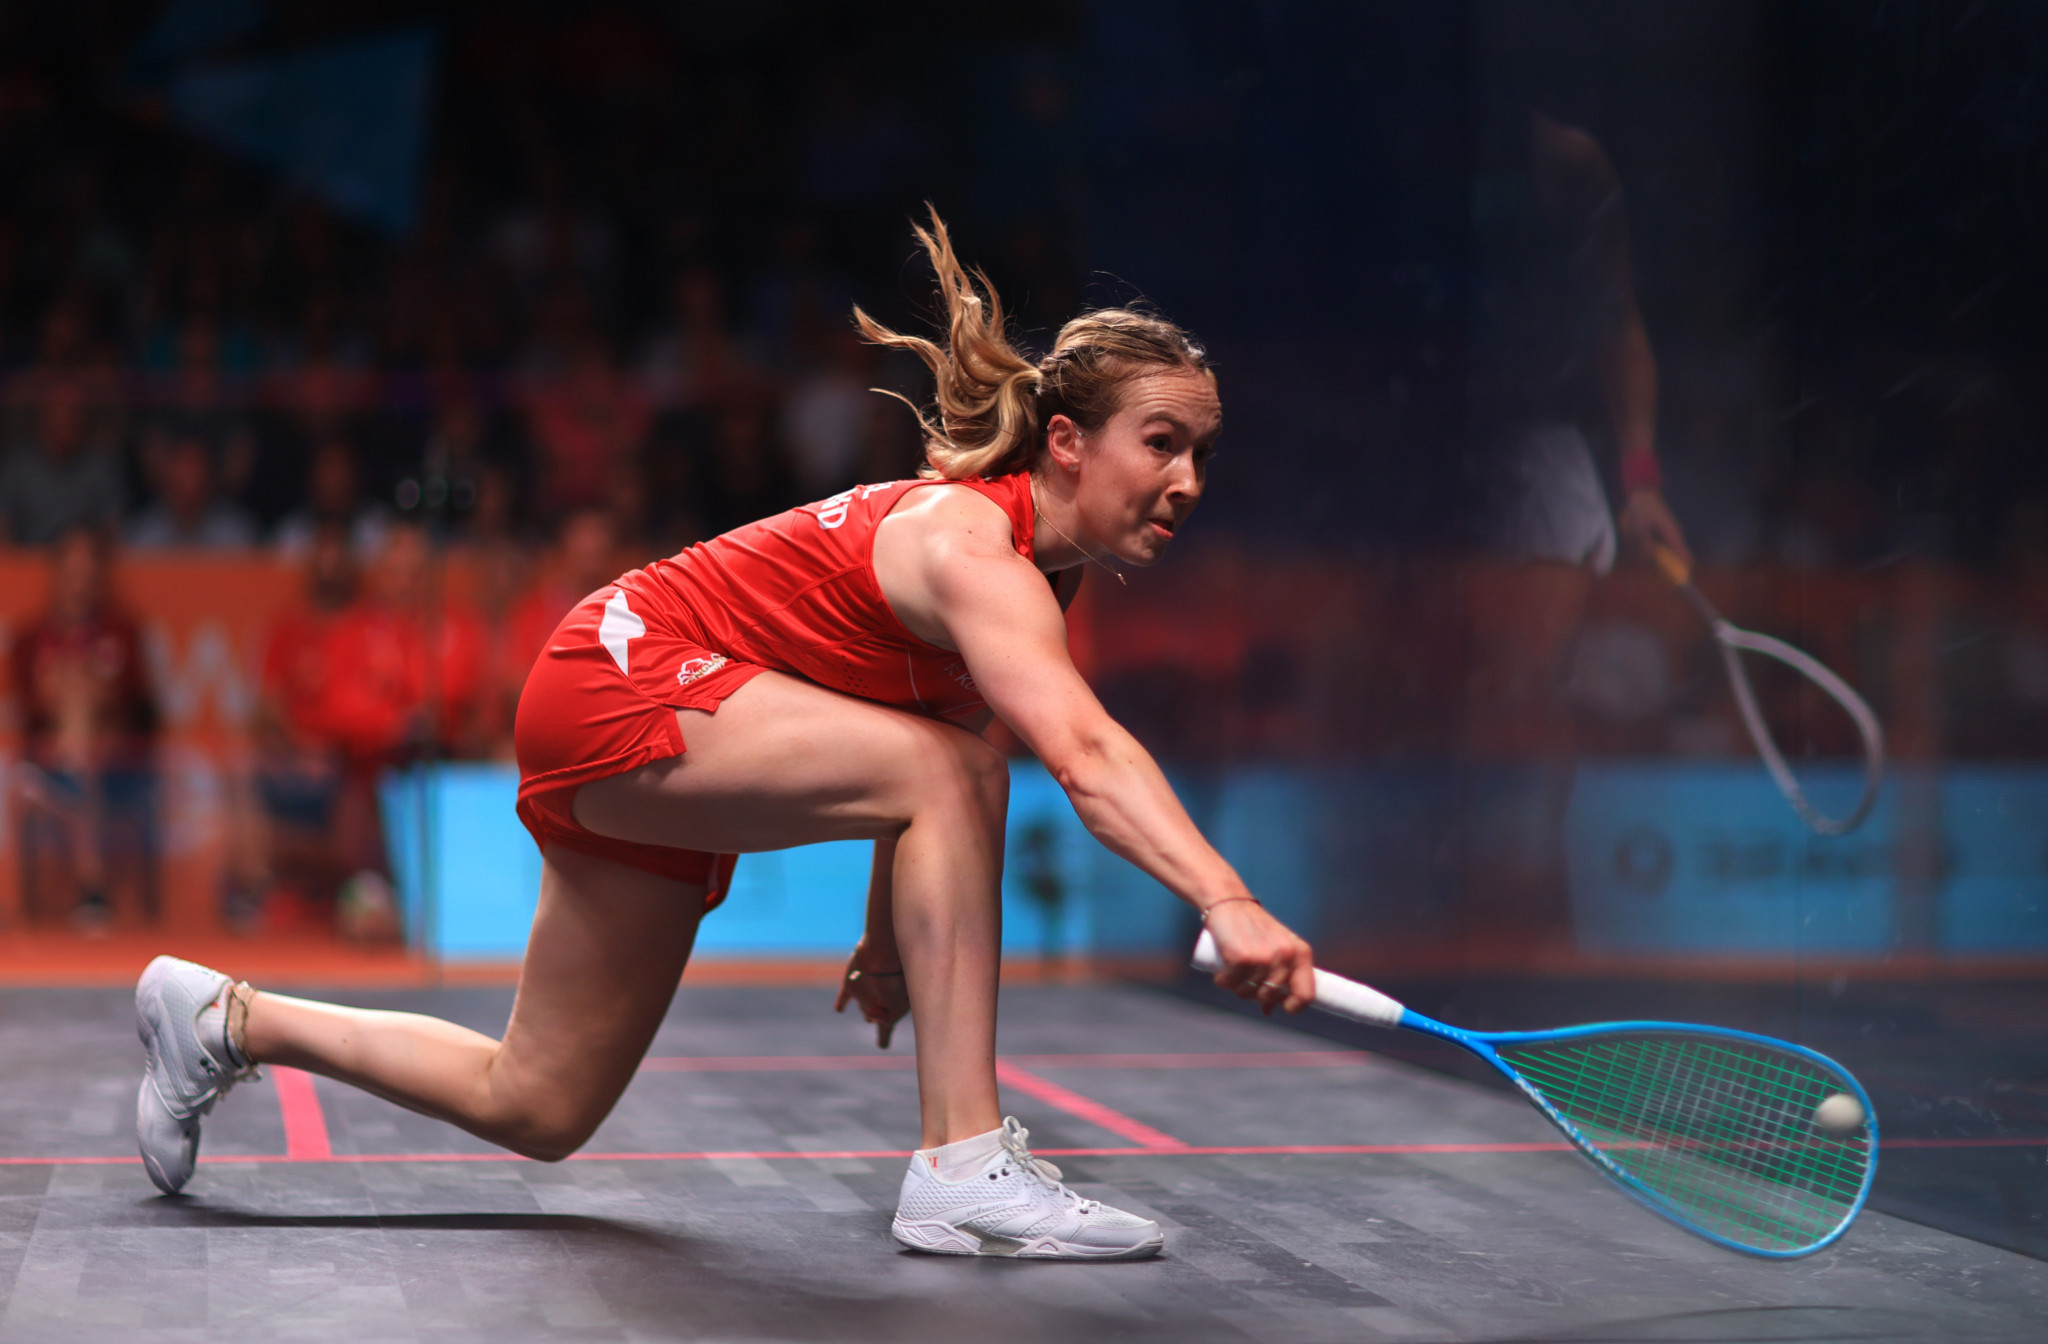 Squash player Lucy Turmel received the scholarship in the build-up to Birmingham 2022 ©Getty Images